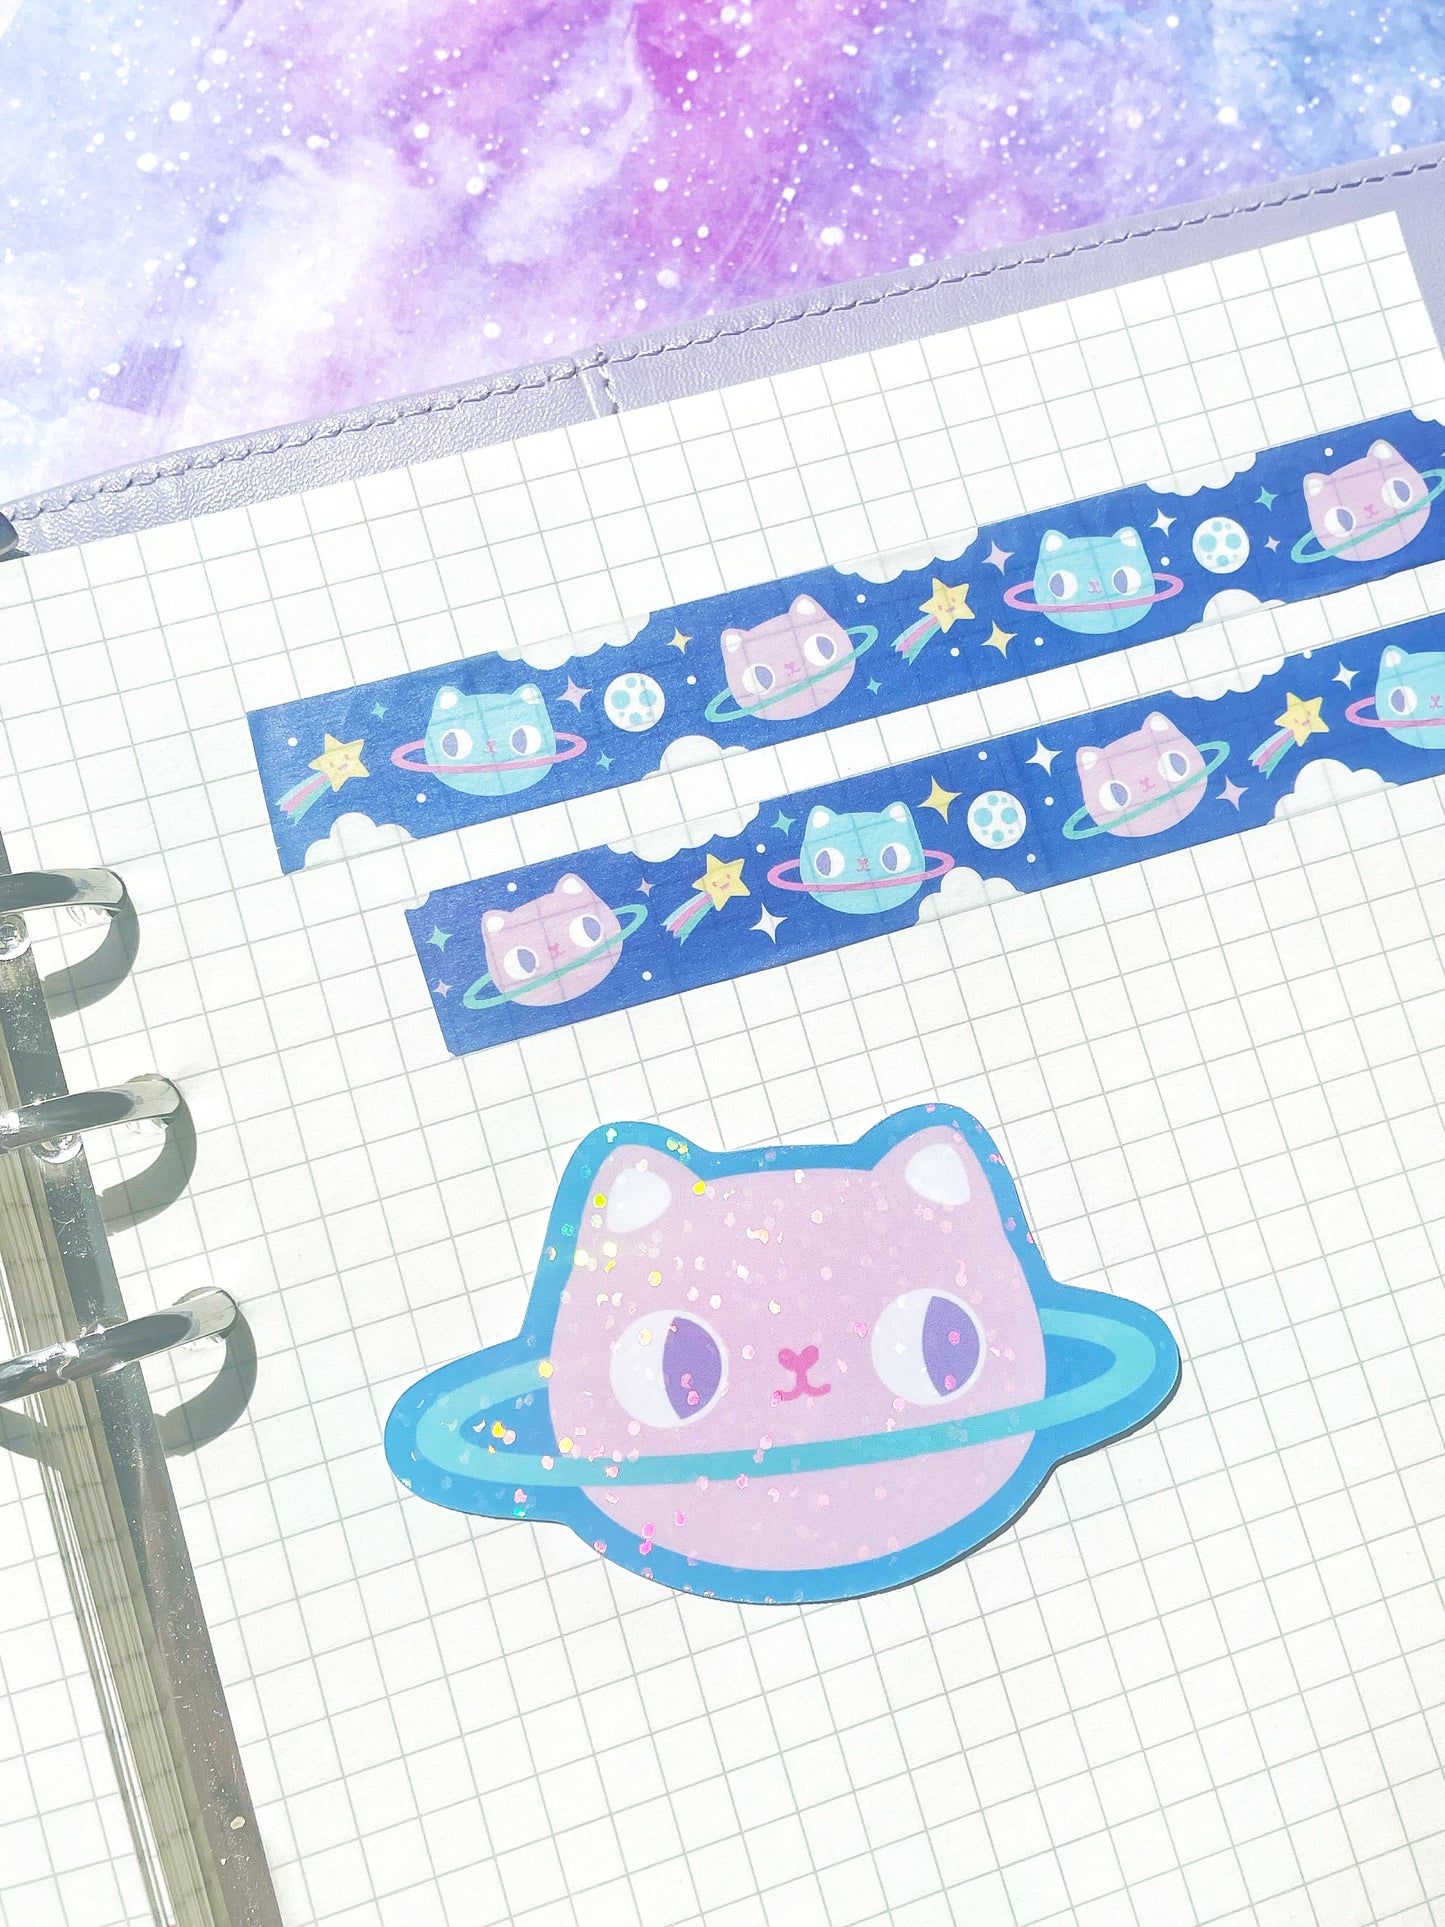 Space Cats Kawaii Washi Tape - Super cute stationery for cat lovers